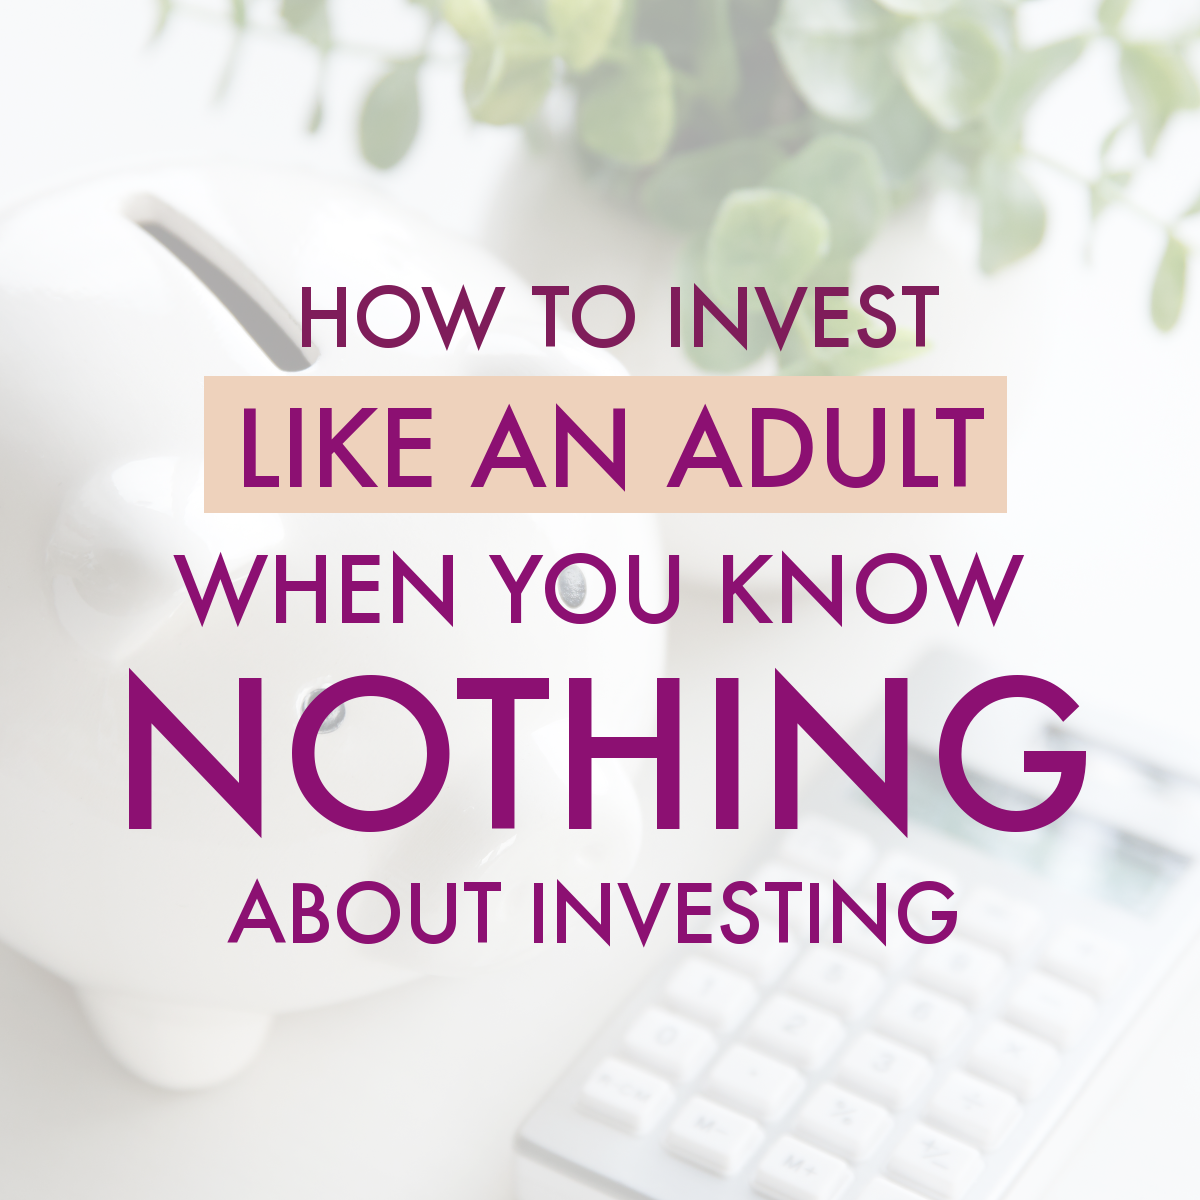 How to Invest Like an Adult When You Know Nothing About Investing